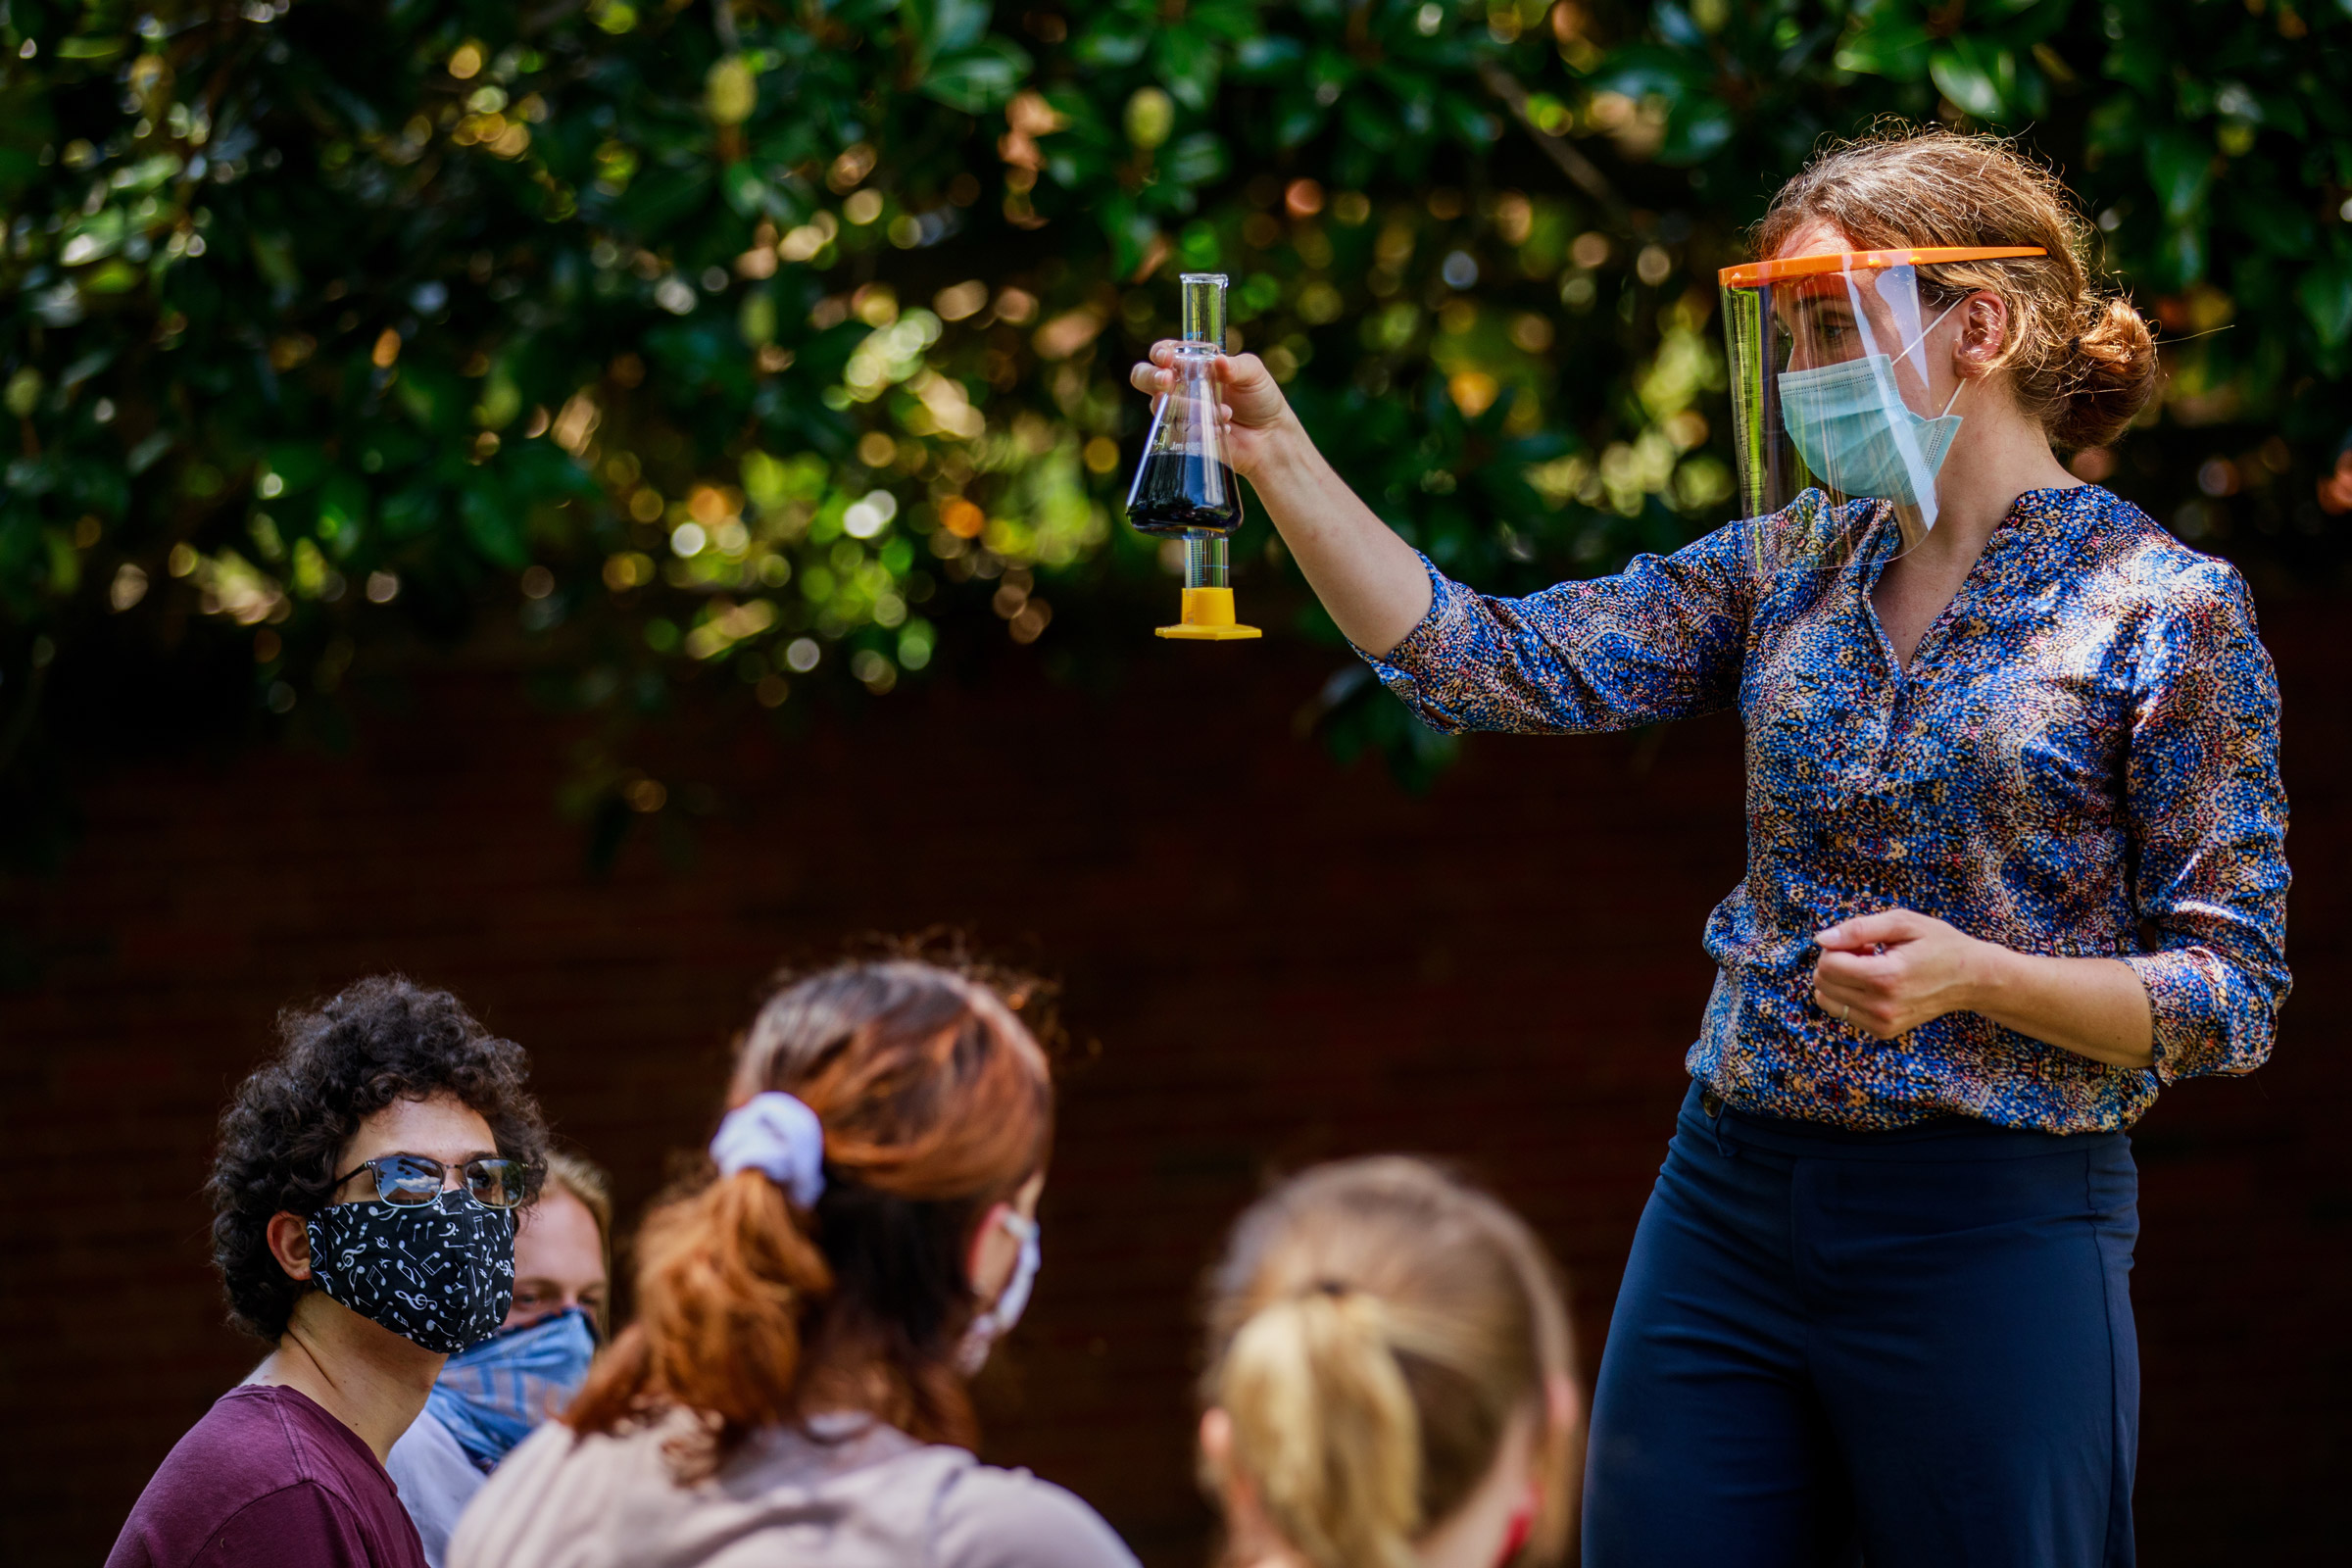 A chemistry professor in a mask and face shield raises a beaker filled with a liquid during an oudoor demonstration